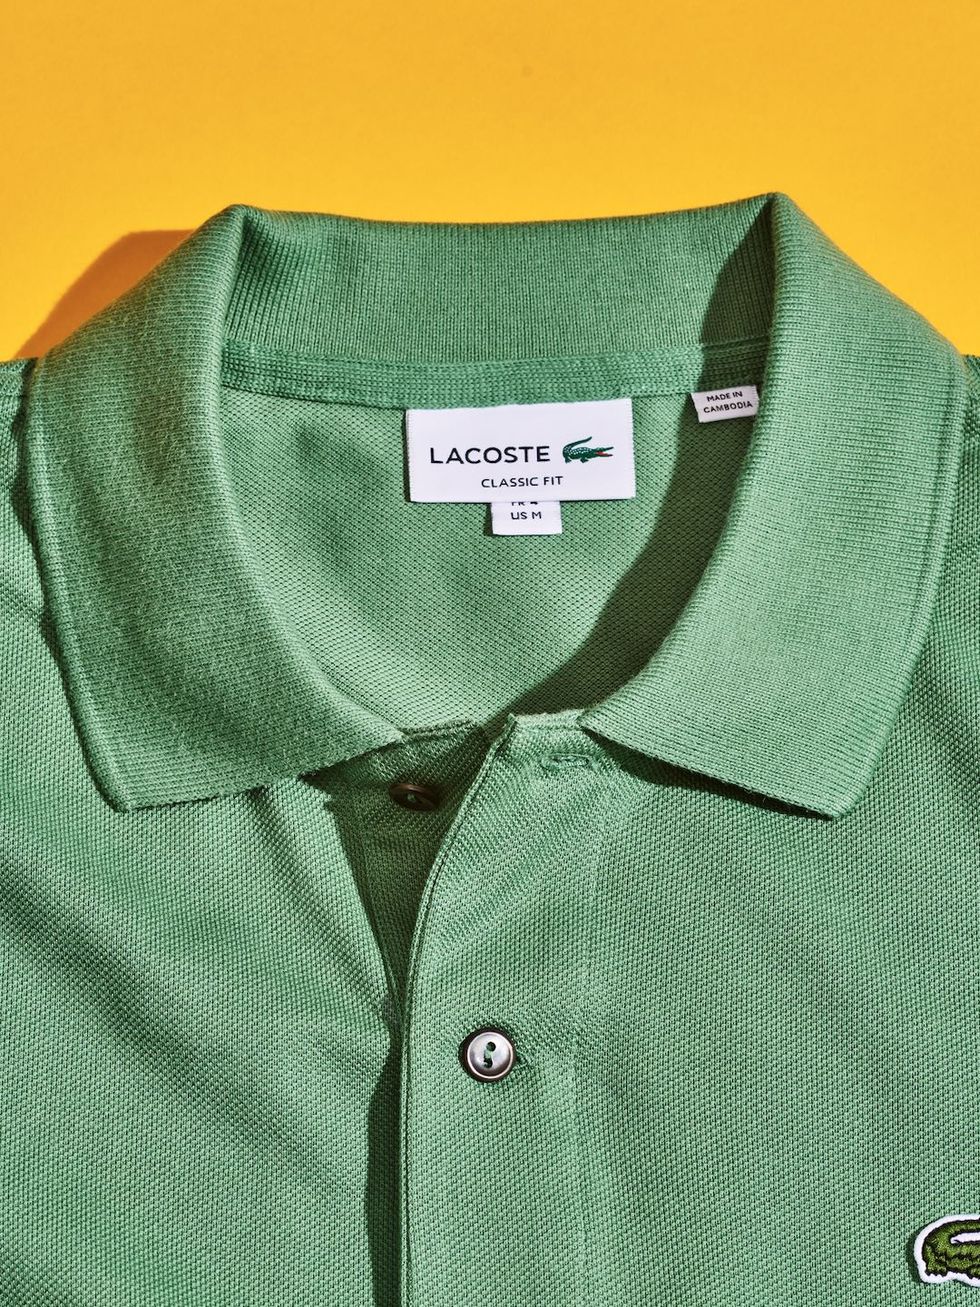 Lacoste Lightweight Polos for Men